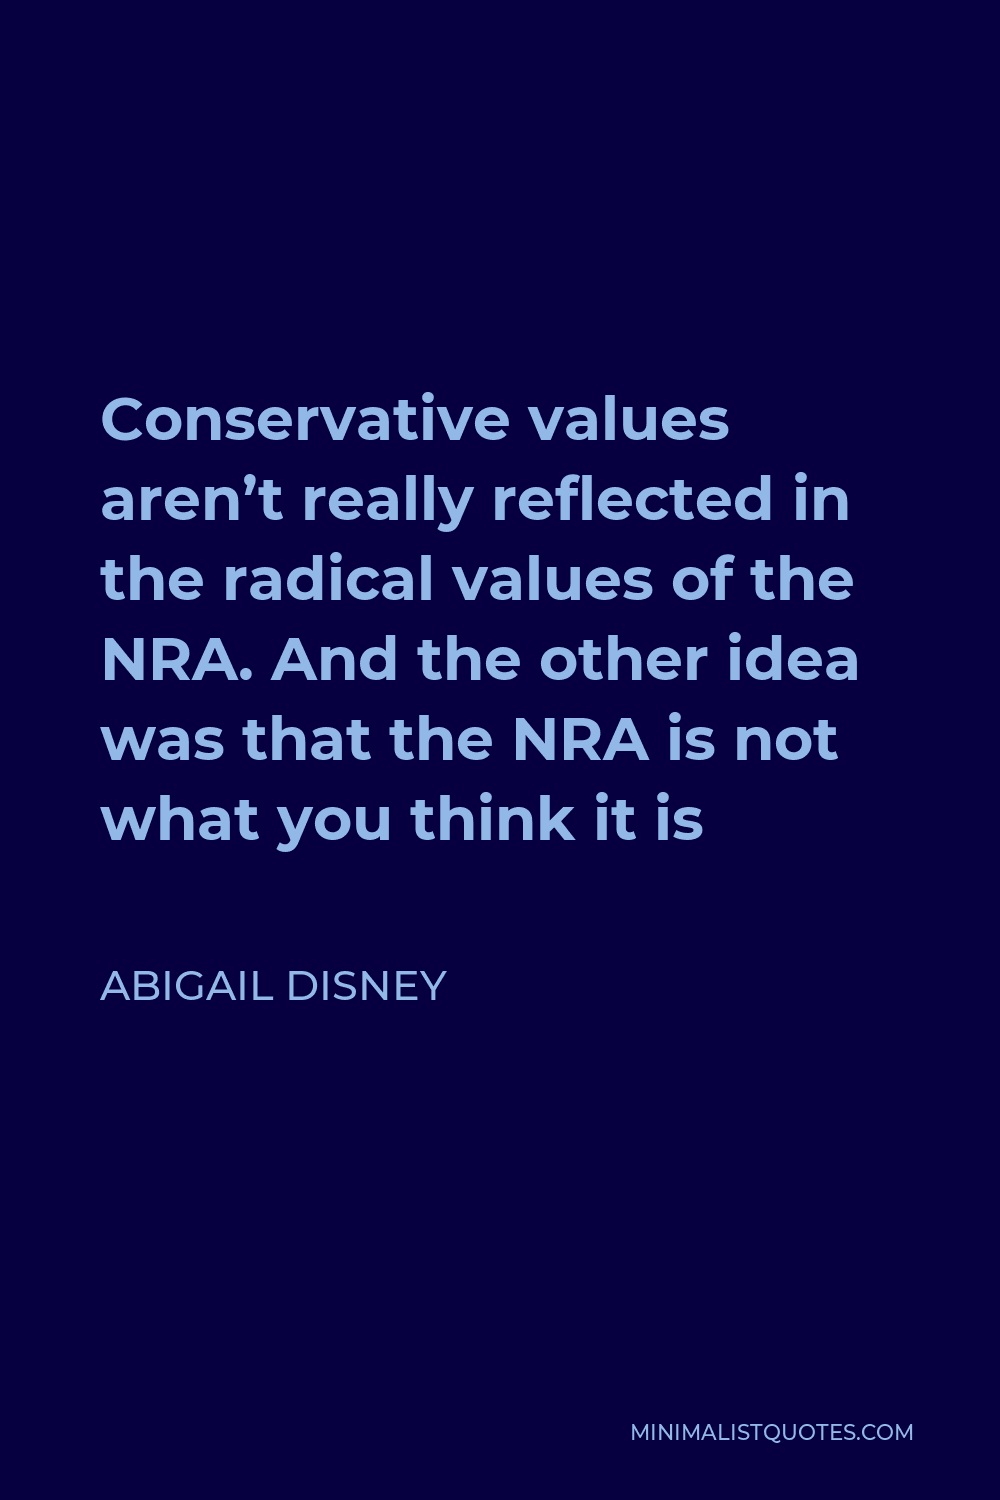 Abigail Disney Quote - Conservative values aren’t really reflected in the radical values of the NRA. And the other idea was that the NRA is not what you think it is